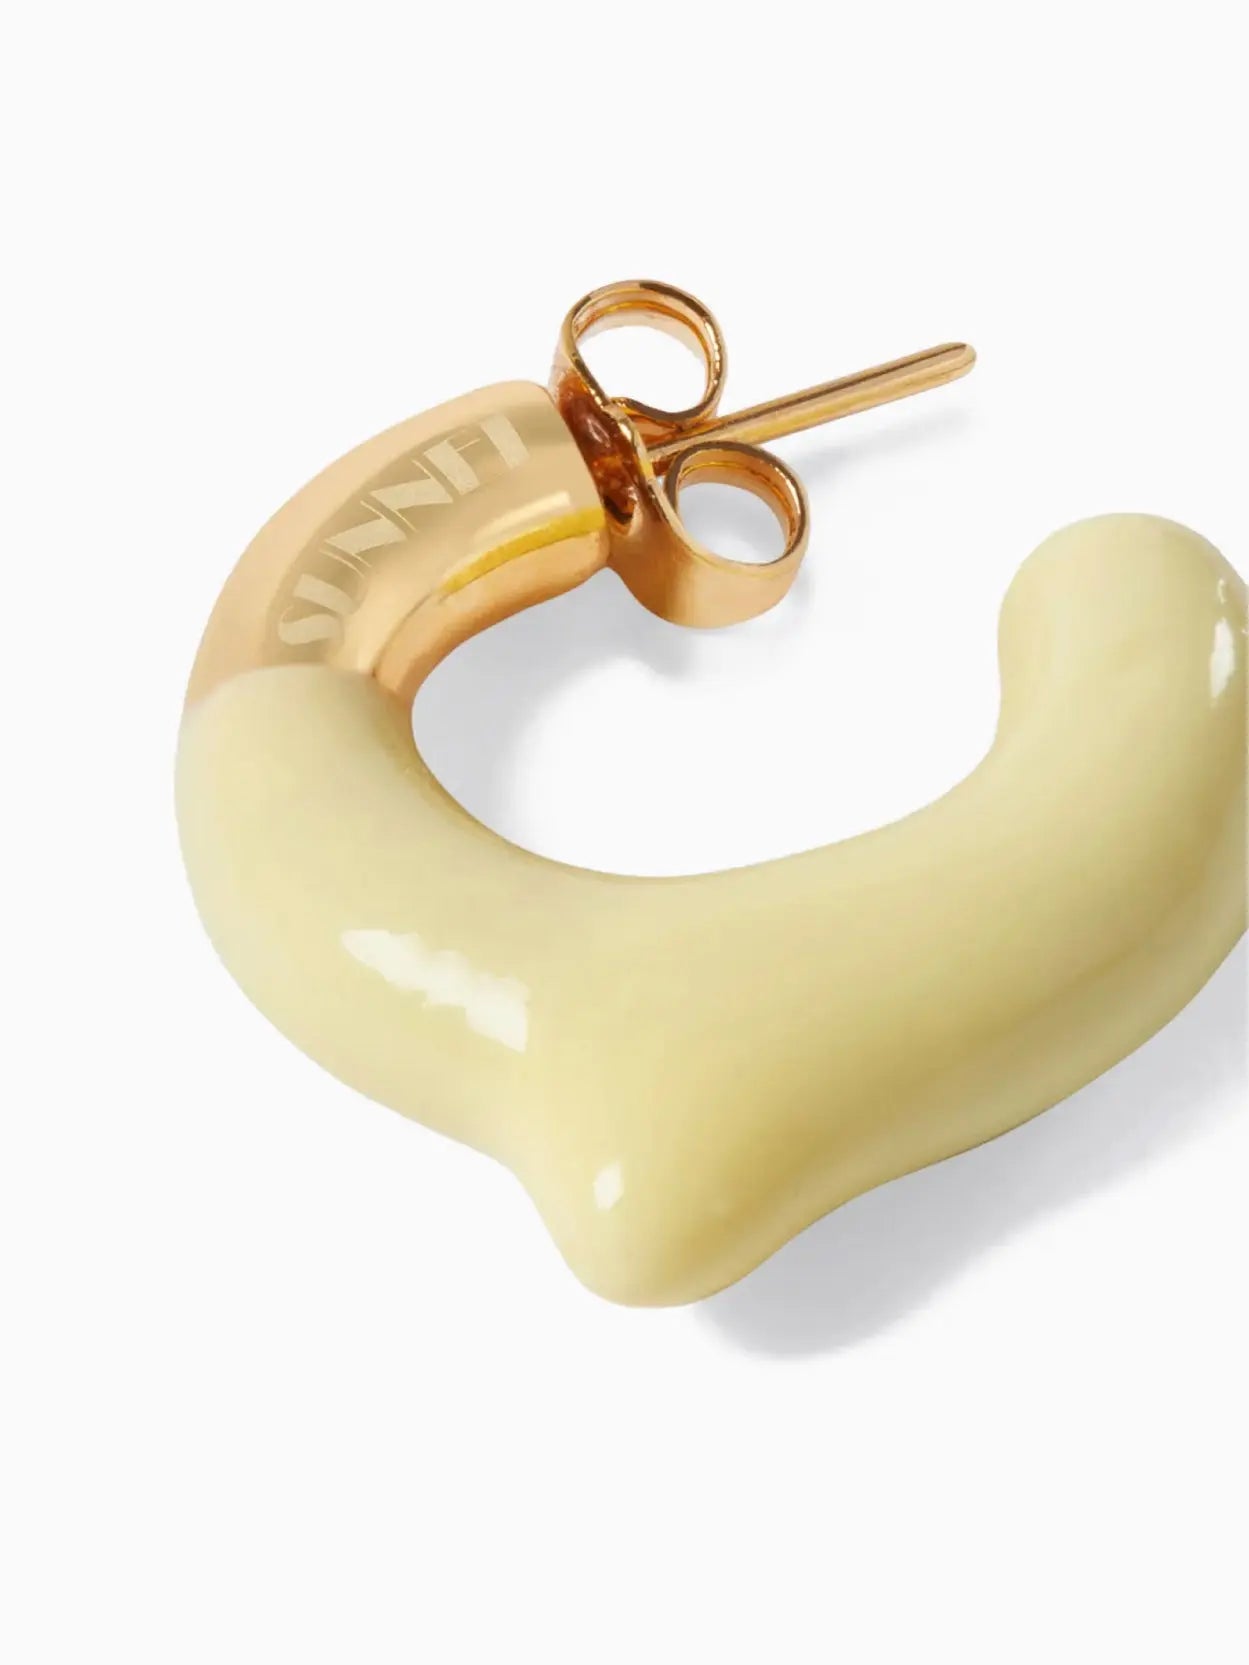 A pair of contemporary Rubberized Small Earrings by Sunnei featuring a unique, smooth, abstract shape. The earrings have a gold-toned attachment with a yellowish, irregularly curved resin design, giving them a modern and artistic appearance. Available at BassalStore in Barcelona. The background is plain white.